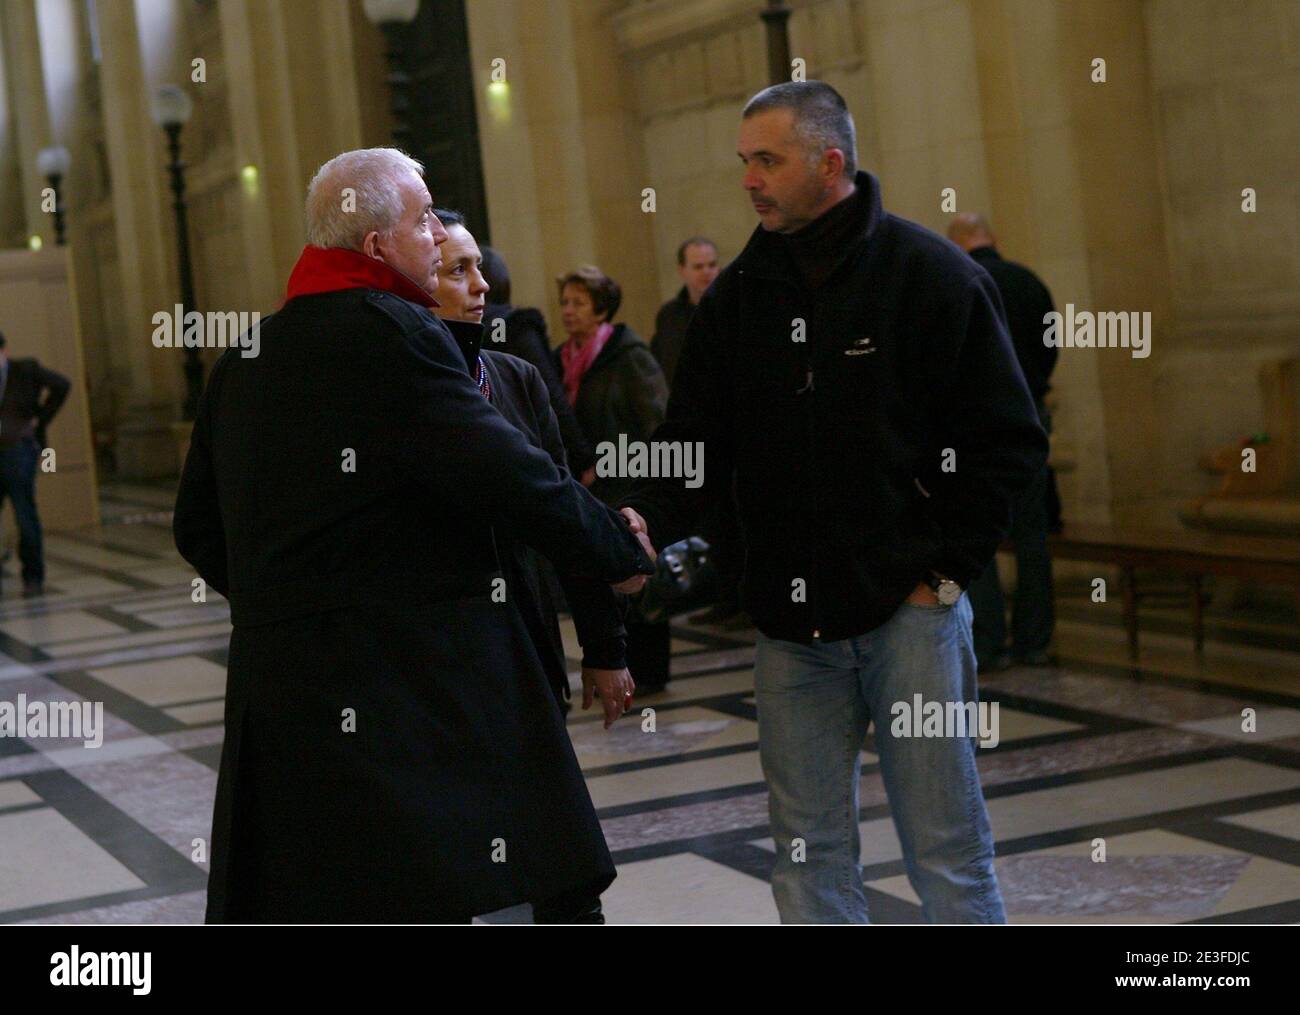 French singer Bernard Lavilliers and Stephane Colonna, brother of Yvan Colonna at the Paris courthouse to attend the Yvan Colonna Trial, in Paris, France, on March 5, 2009. Photo by Mousse/ABACAPRESS.COM Stock Photo